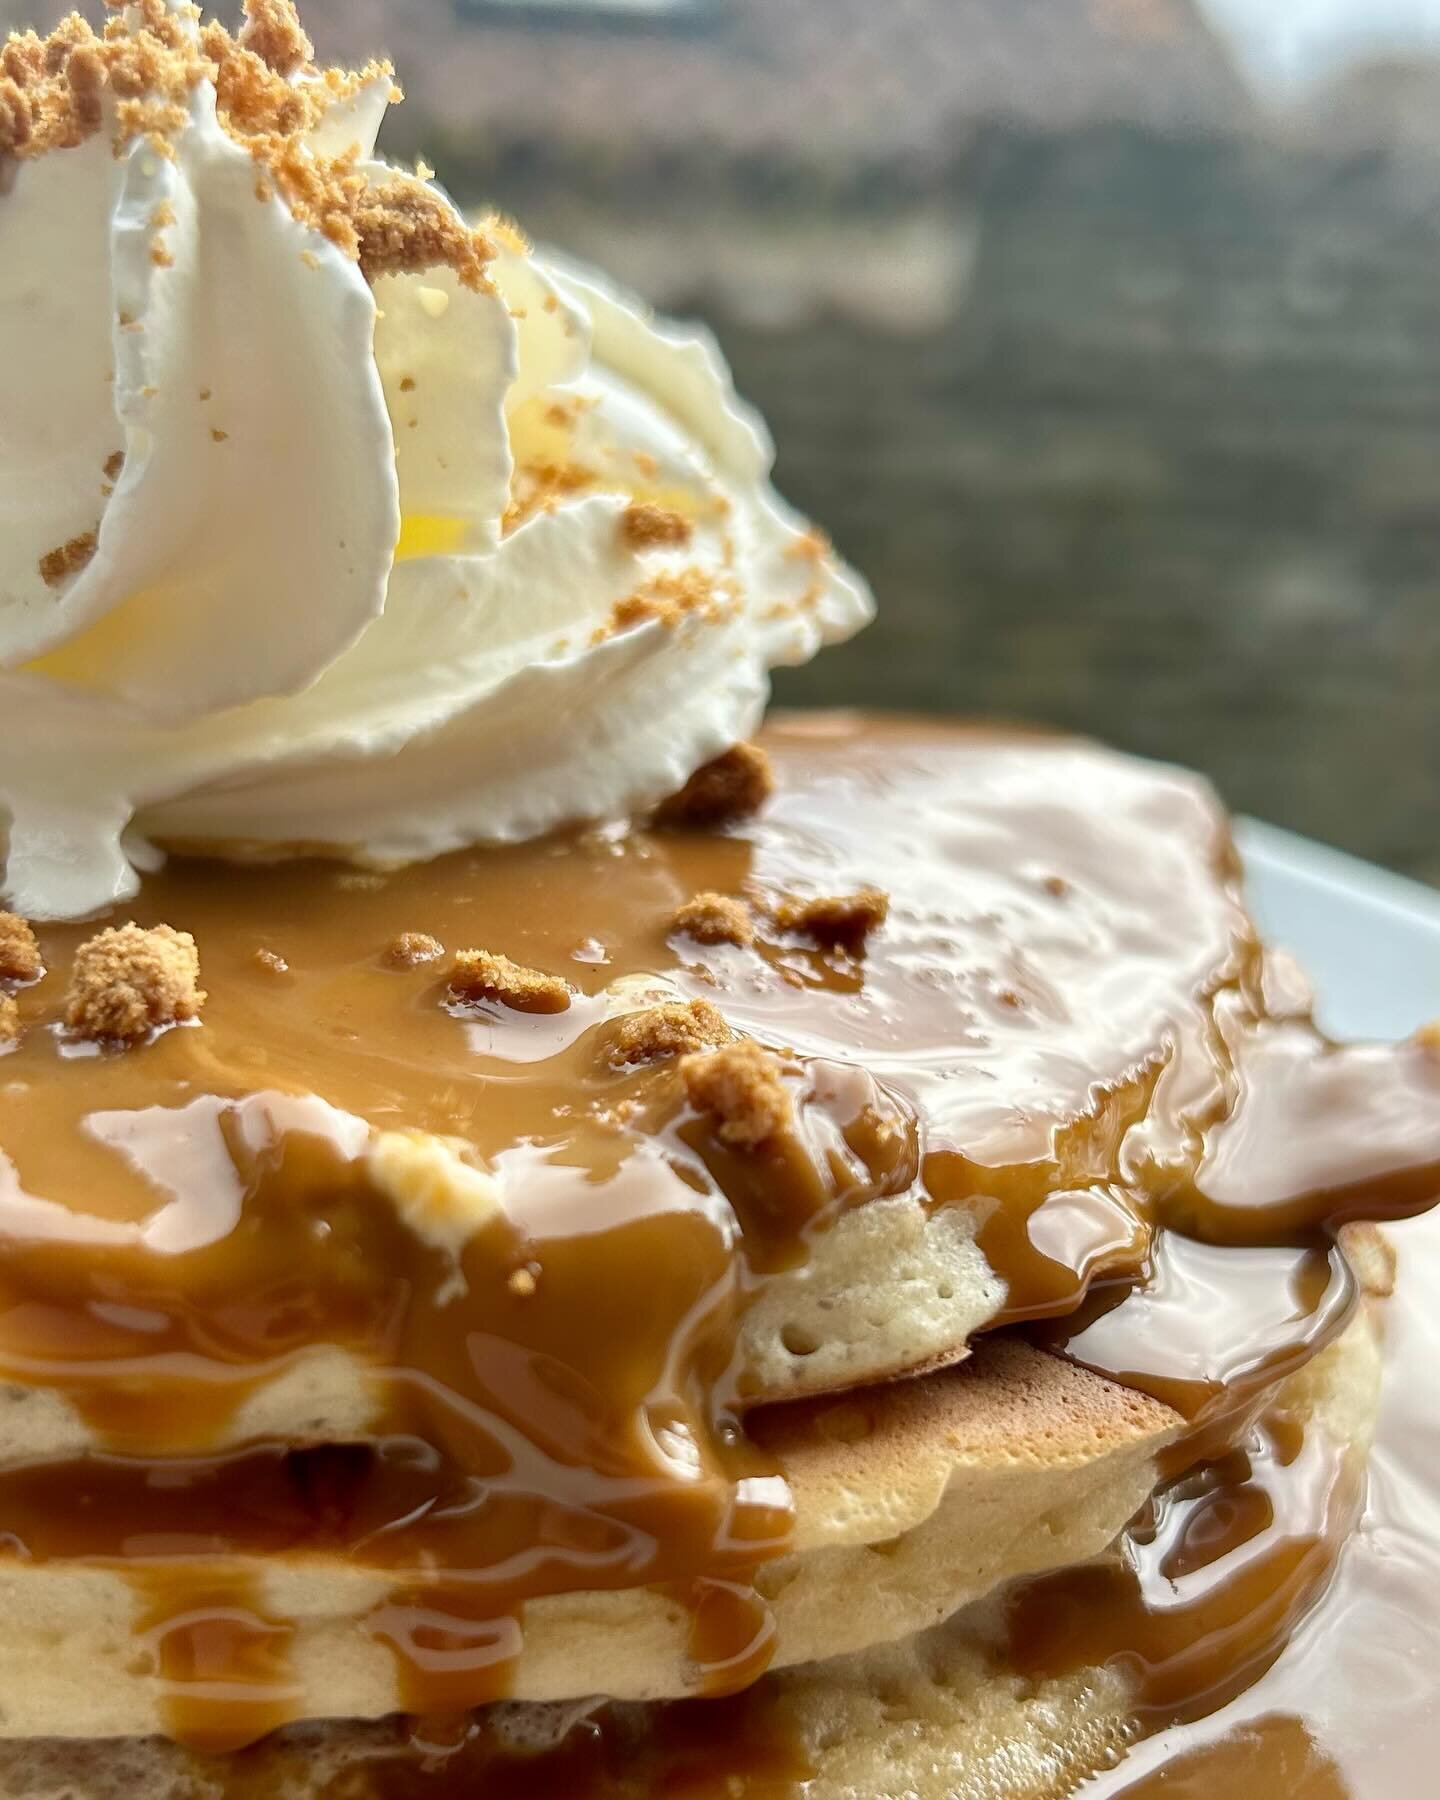 Pancake day special available tomorrow only! Triple stack of American pancakes with Nutella, Biscoff or maple syrup, plus squirty cream of course! Available as a brunch special, 10.30am-2.30pm